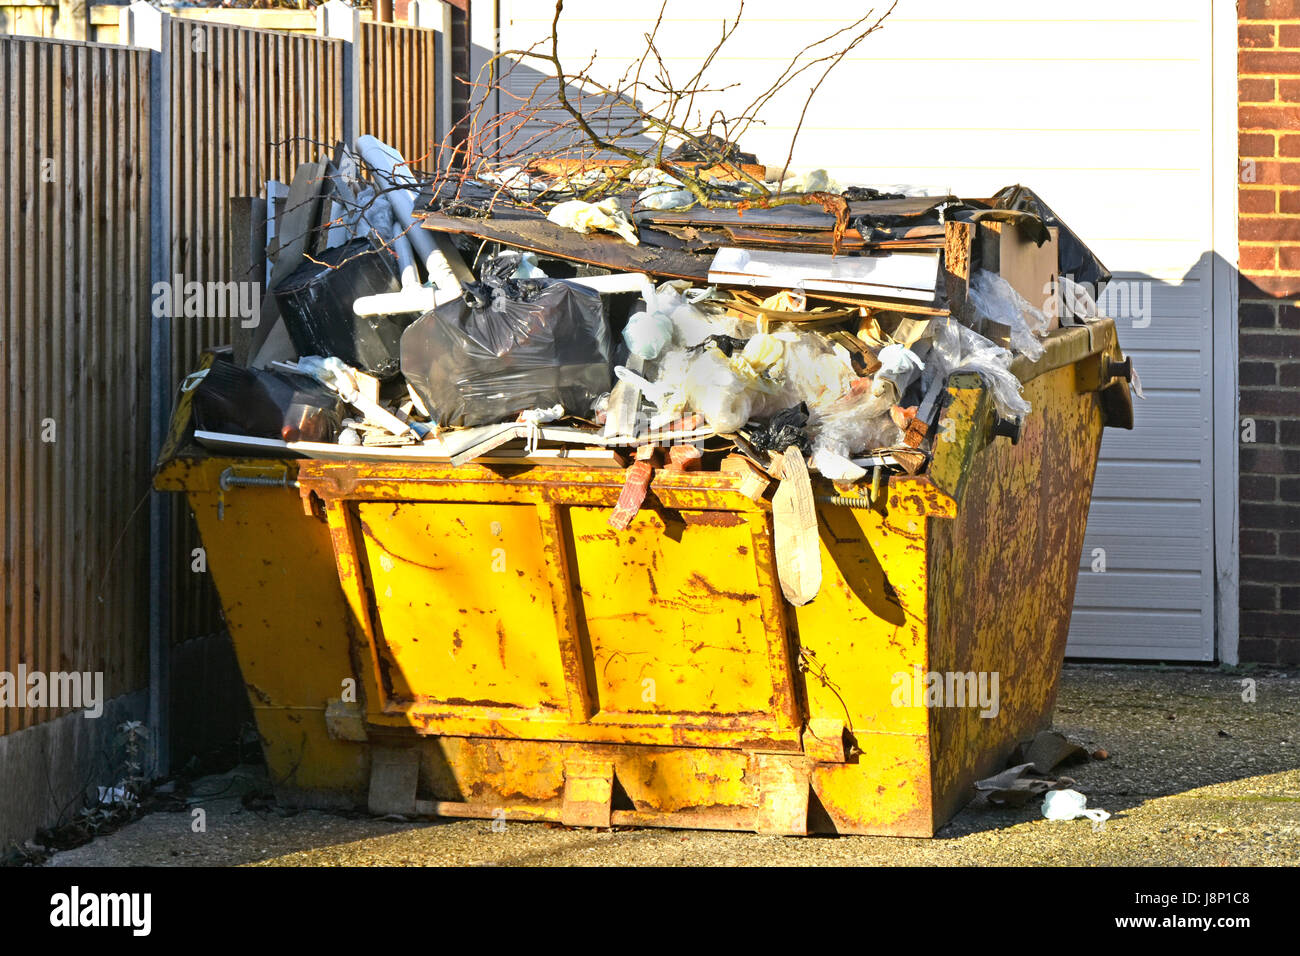 Full UK skip bin rubbish uk waste management logistics garbage trash overflowing awaiting moving to landfill from domestic property after clearout Stock Photo